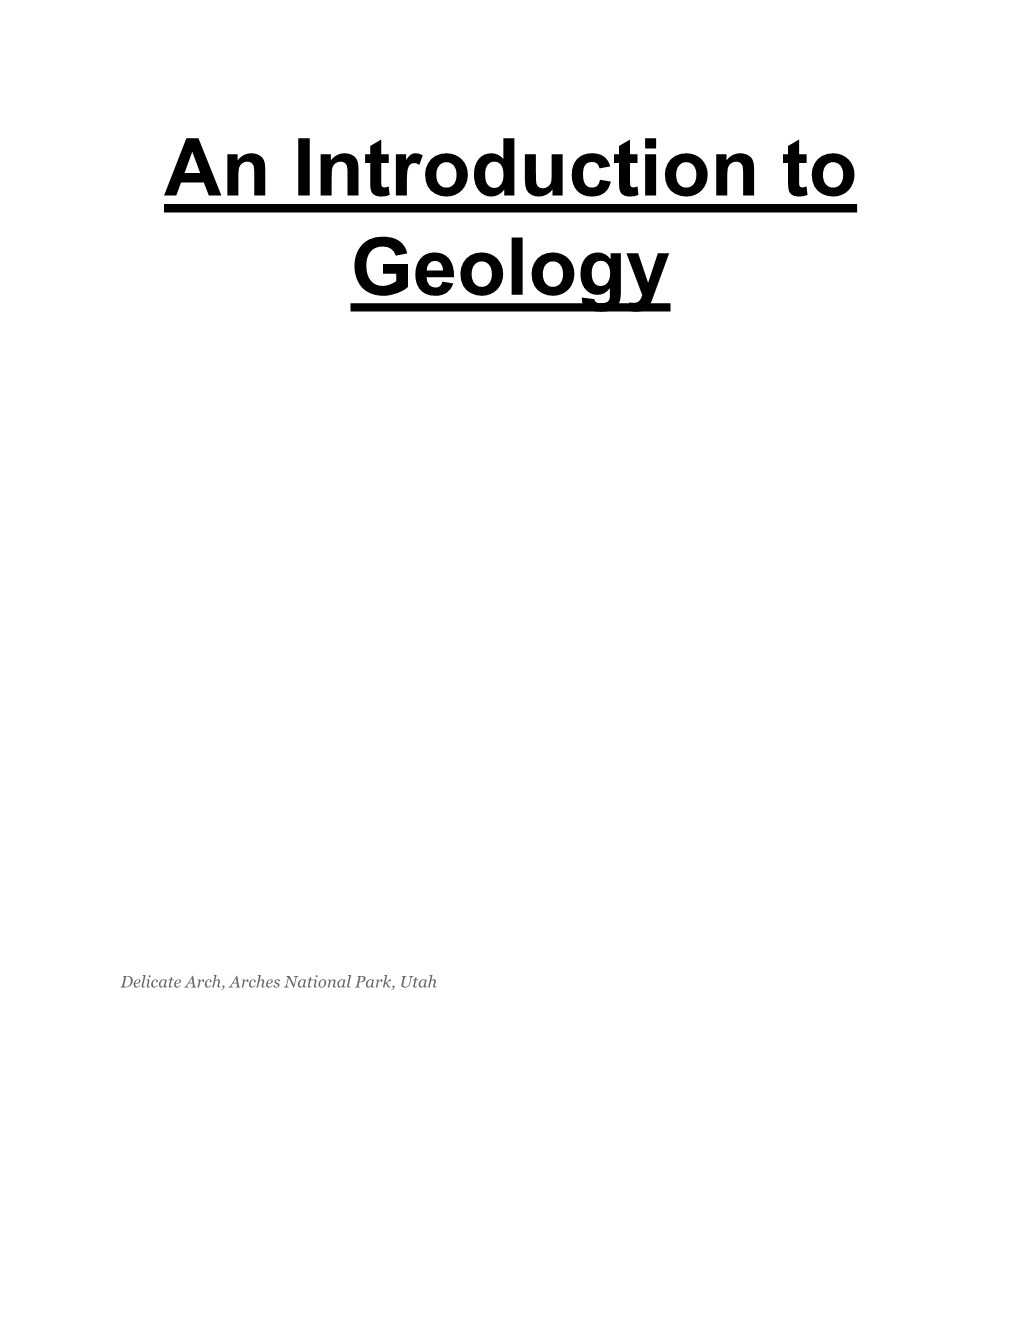 introduction to geology essay